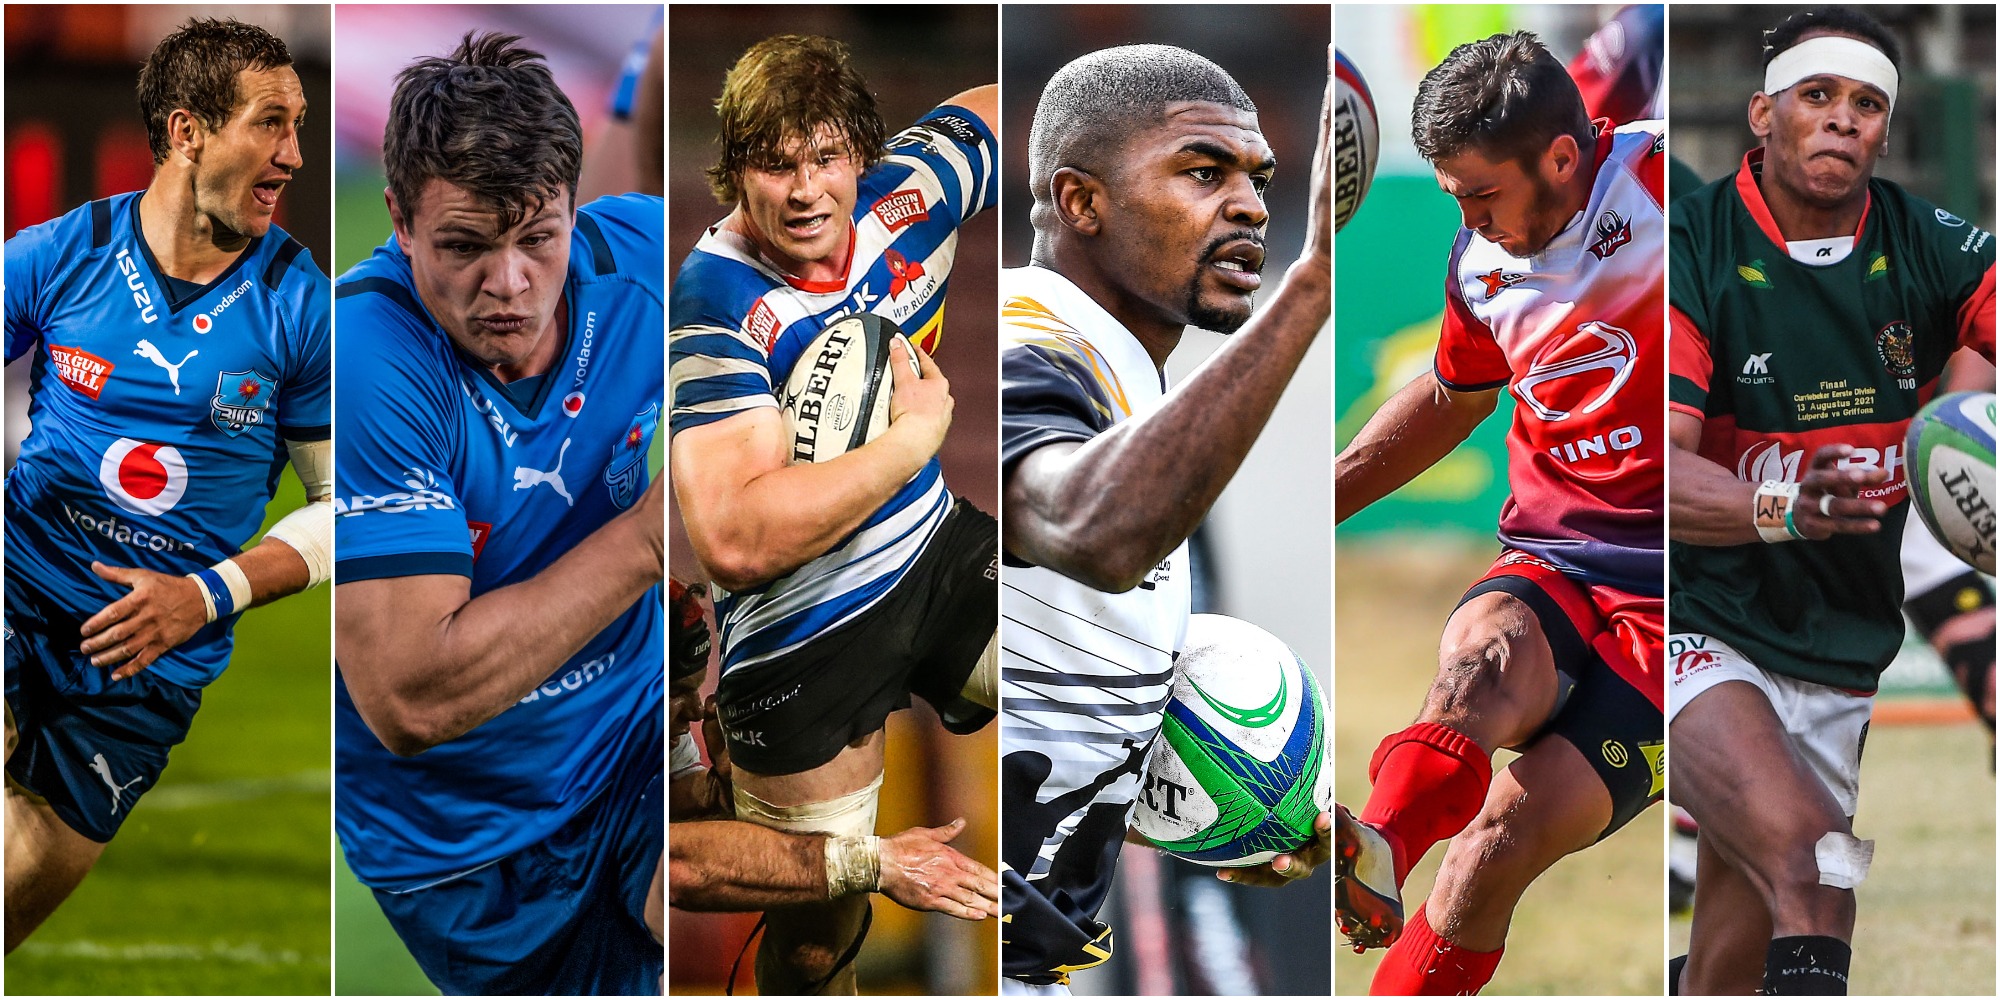 Carling Currie Cup Player of the Year nominees (left to right): Goosen, Louw, Roos, Maart, Richter and Visagie.